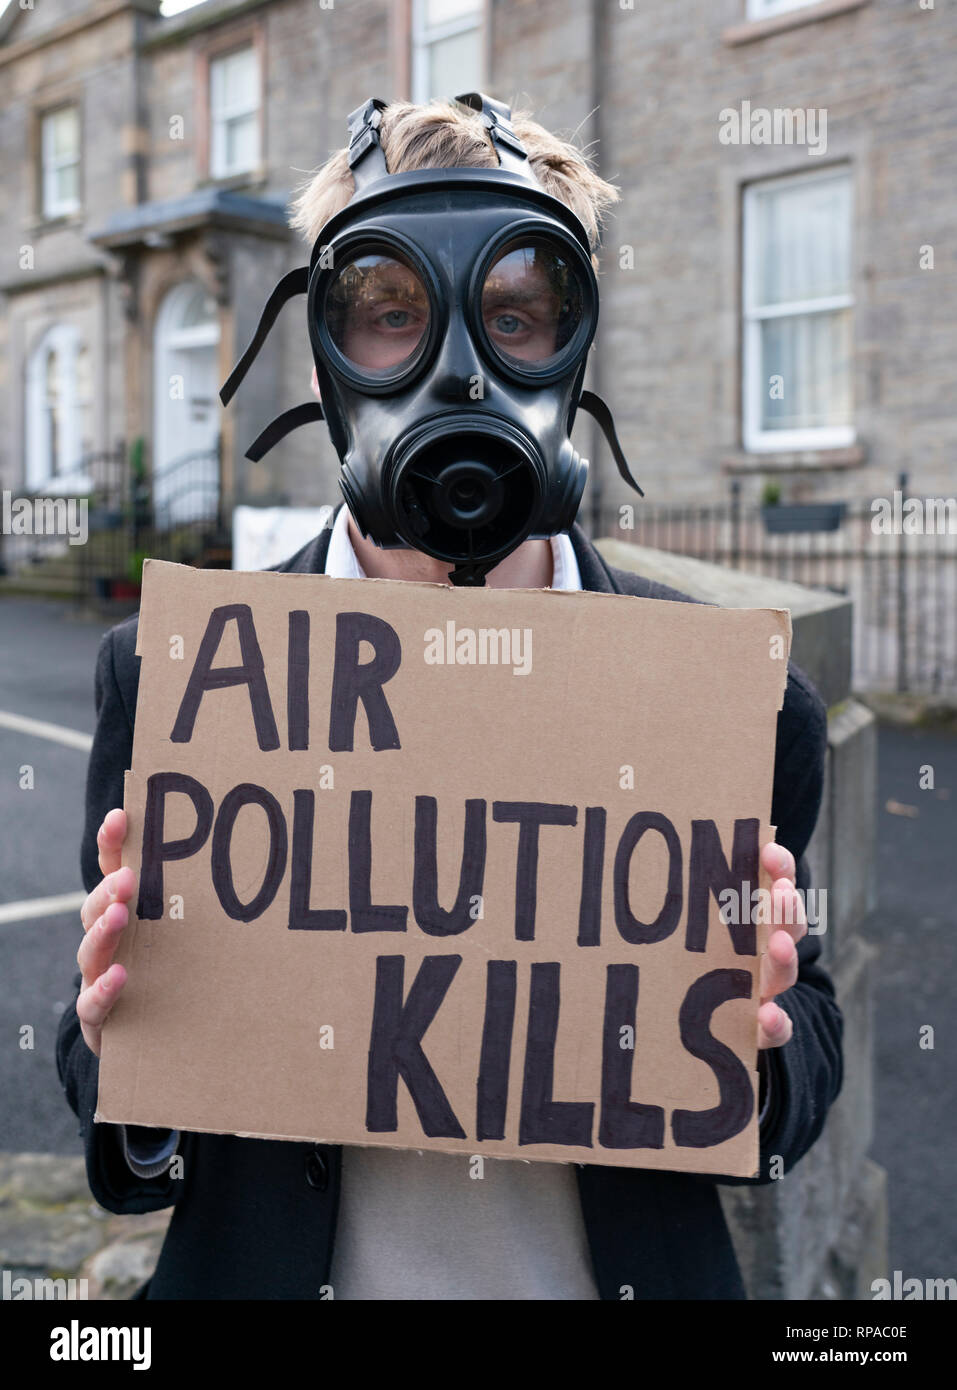 Edinburgh, Scotland, UK. 21st Feb, 2019. Anti air pollution campaigners stage protest at unveiling of Scottish Conservatives' Ad Van against the proposed Car Park Tax. Jackson Carlaw MSP and Miles Briggs MSP unveiled an Ad Van at an Edinburgh care home today before it travels across the central belt of Scotland to workplaces that are set to be hit by the proposed Car Park Tax which is to be voted through the Scottish Parliament by the SNP and Green parties. Credit: Iain Masterton/Alamy Live News Stock Photo